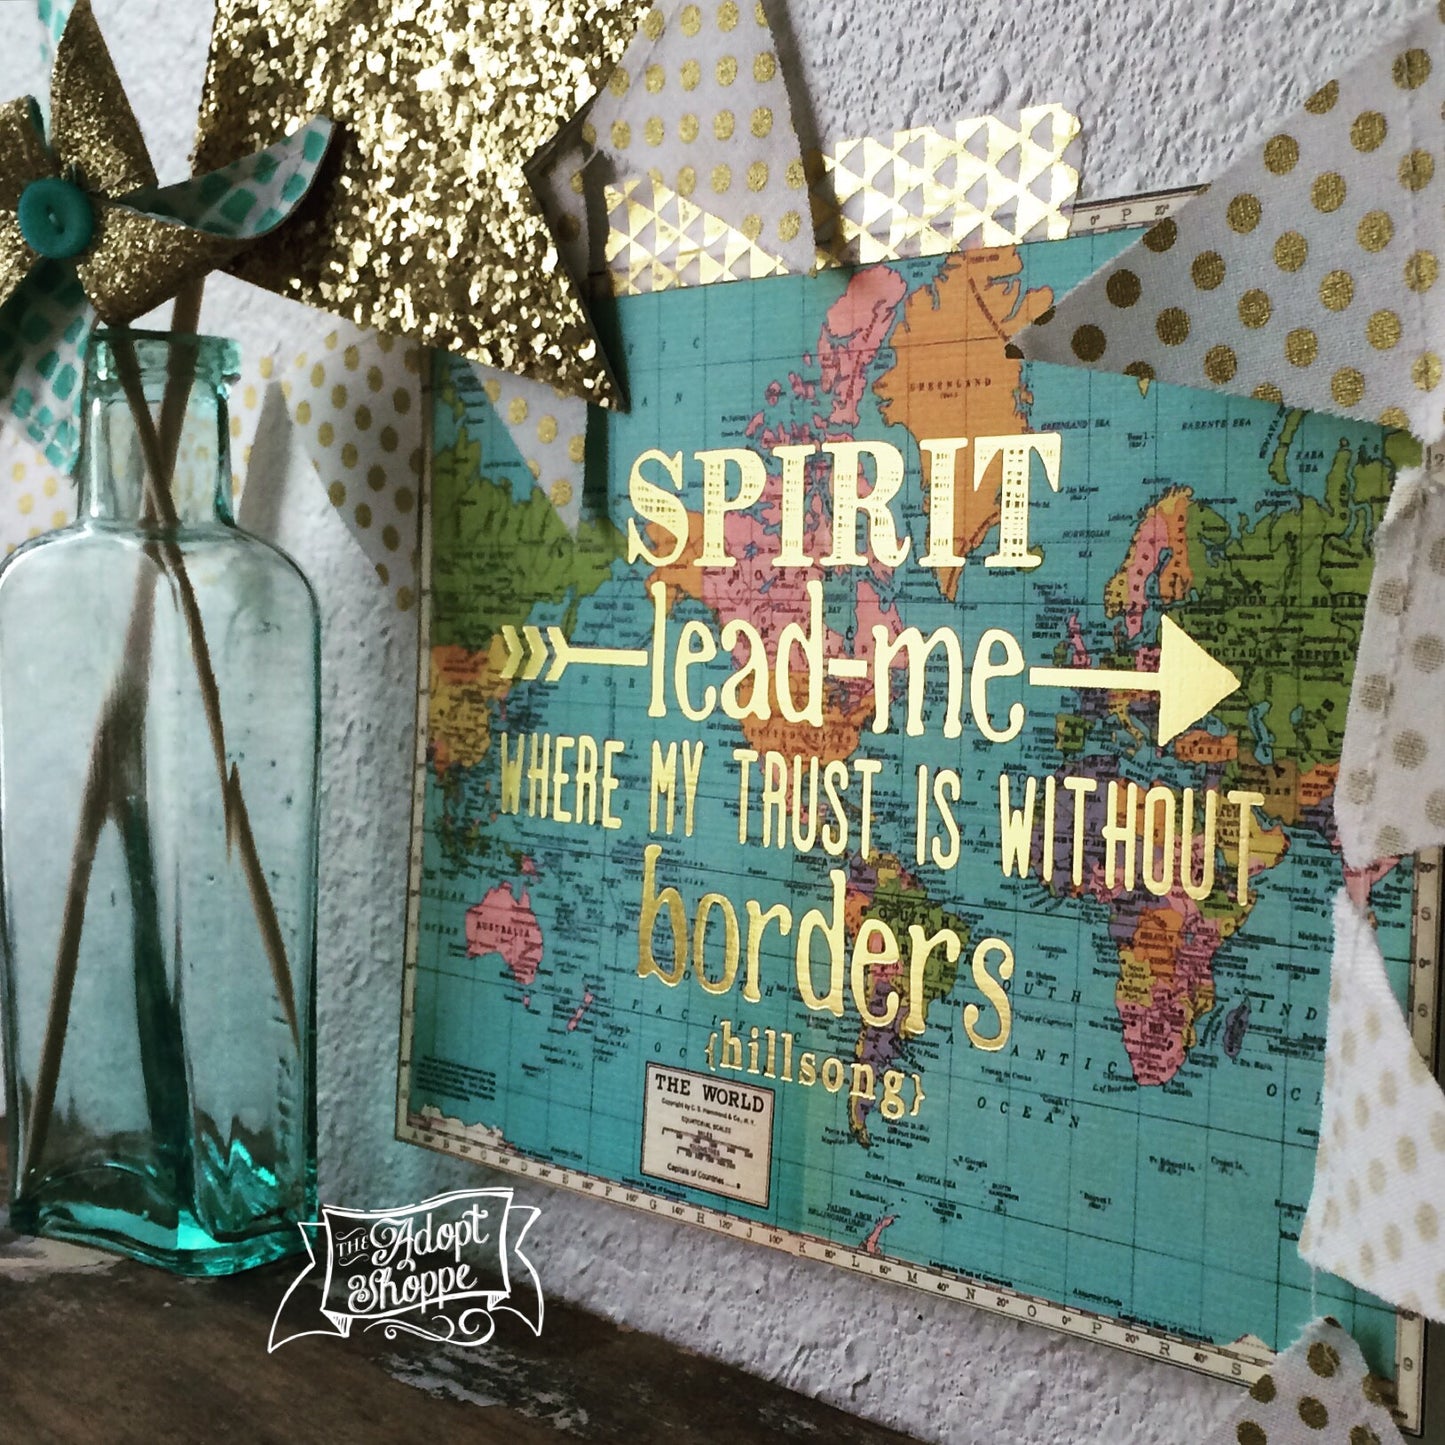 Spirit lead me where my trust is without borders gold foil 5"x7" print